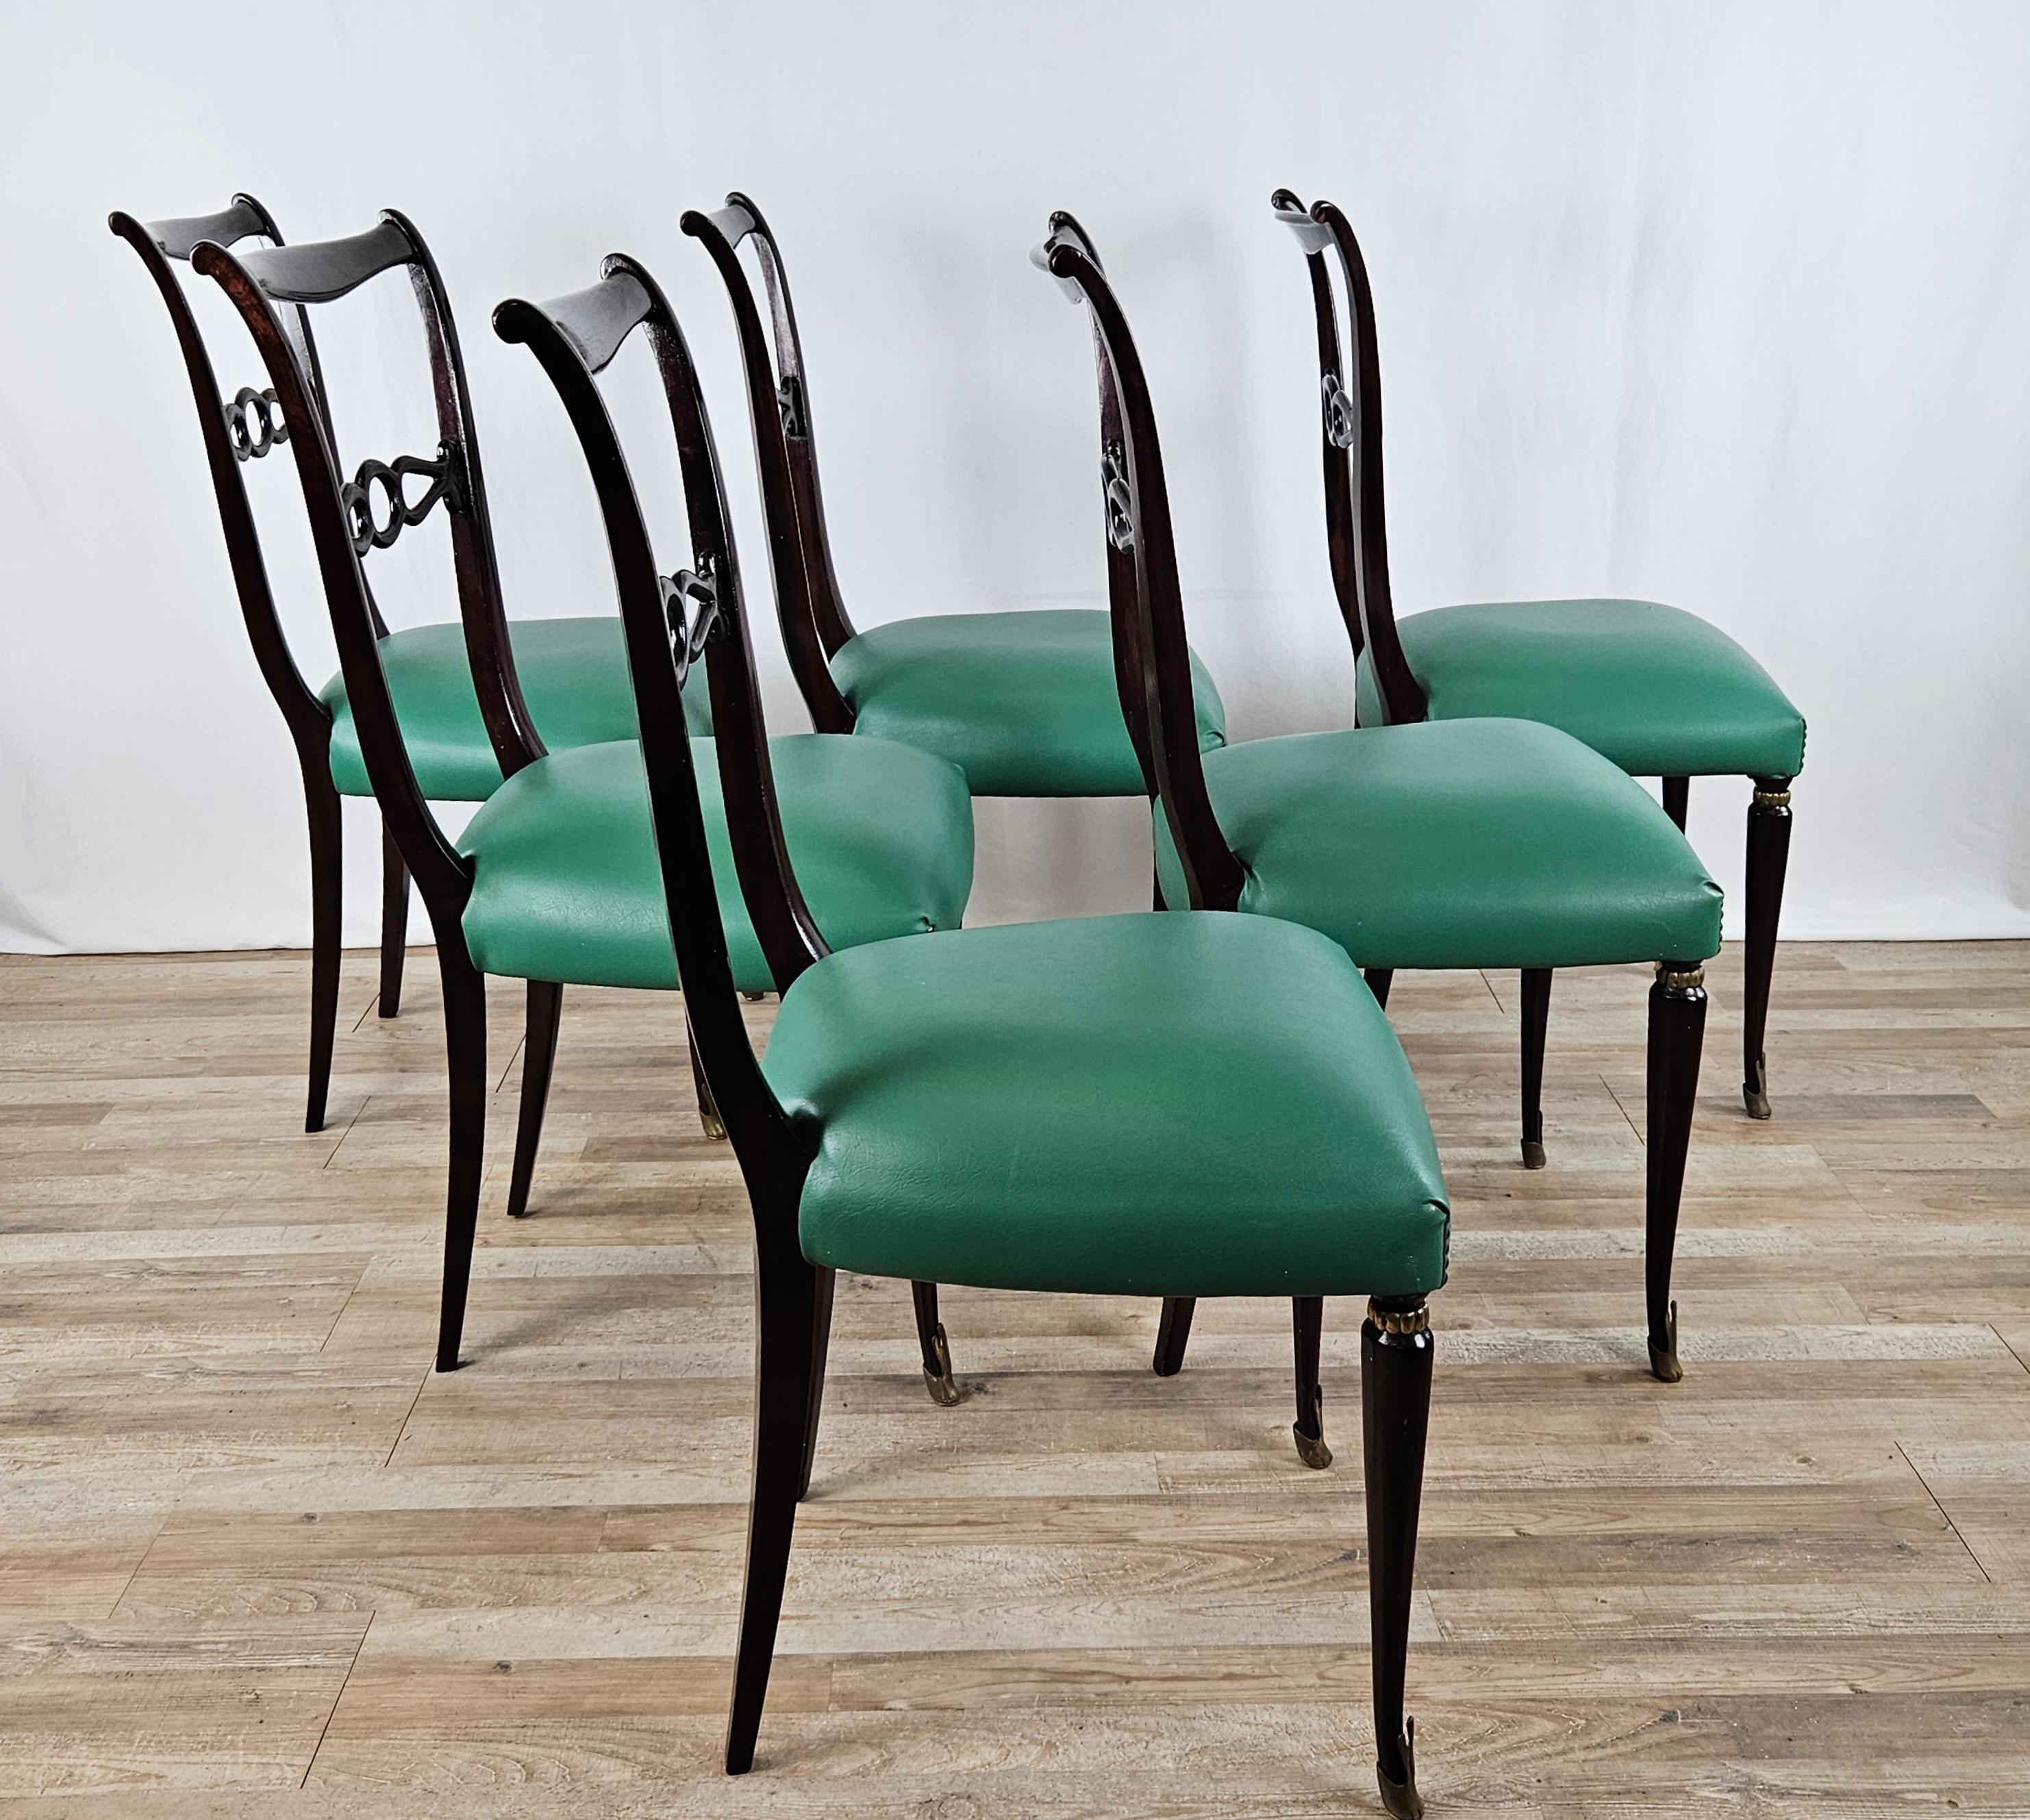 Elegant set of rosewood dining room chairs from the 1950s designed based on Paolo Buffa's design, high quality Italian production.

The chairs feature machining in the center back and large, comfortable upholstered seats covered in